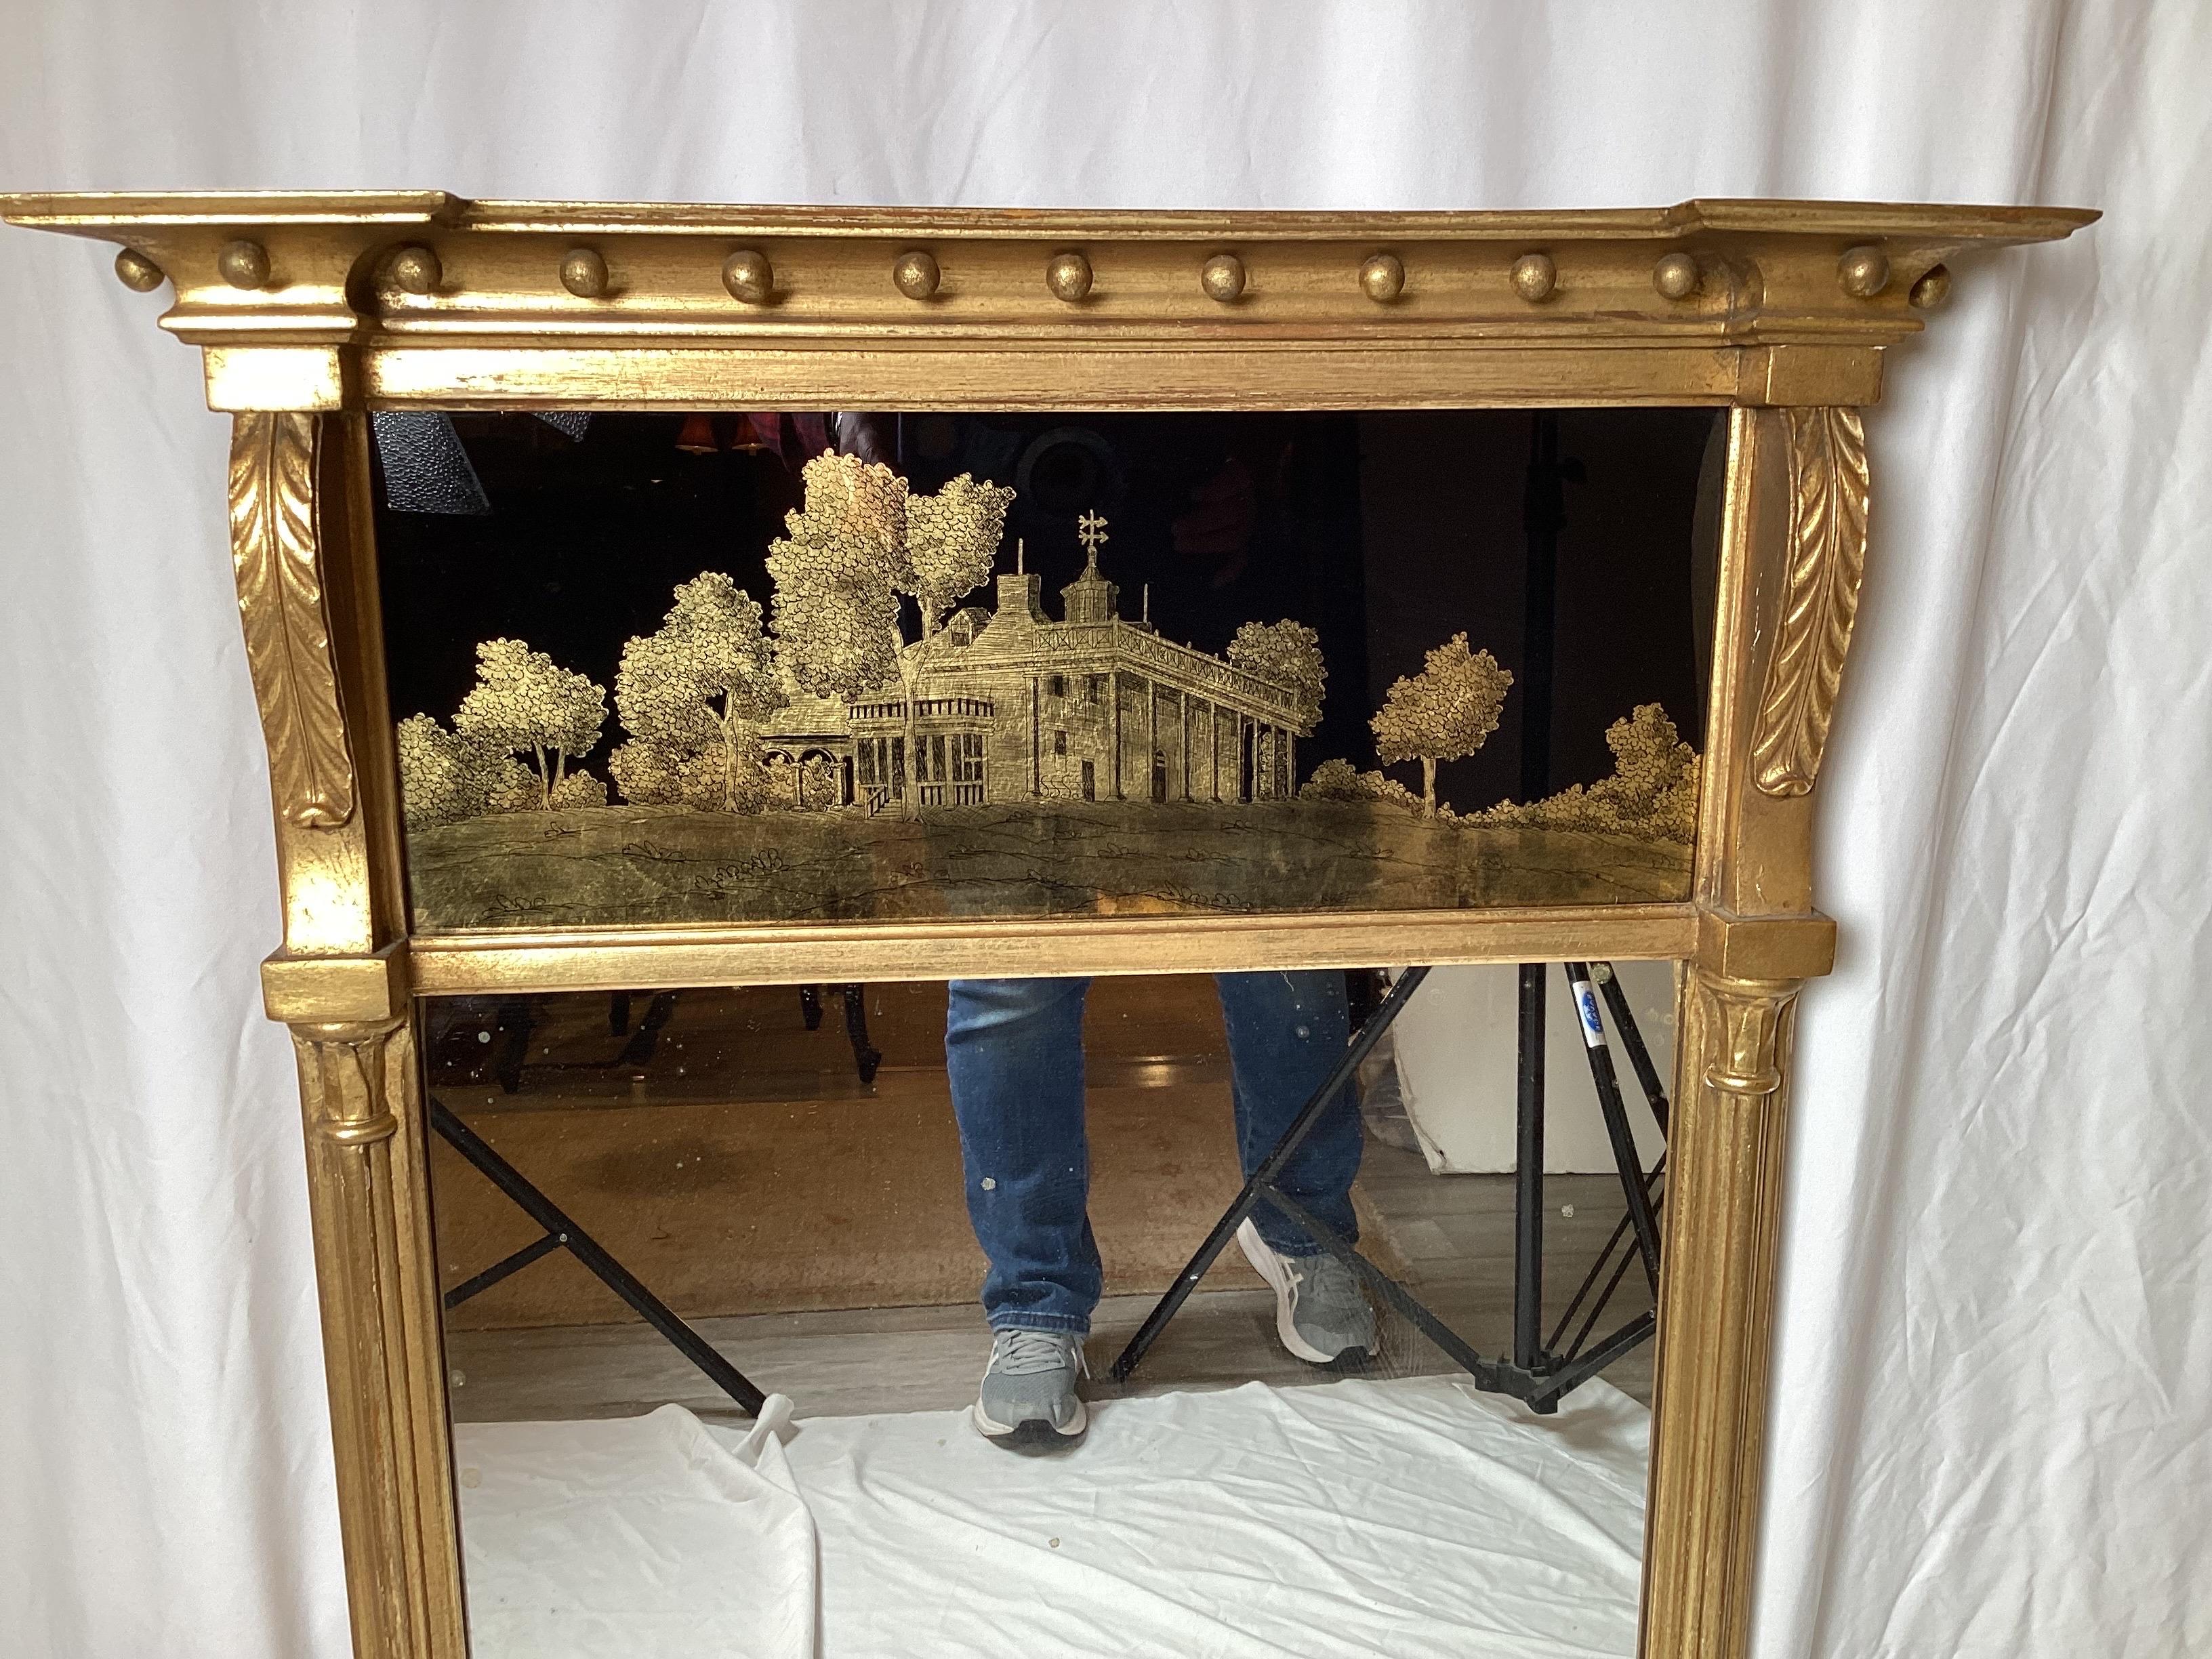 Handsome Late 19th Century Federal style wall mirror. The original gilt on the frame with an eglomise picture of Monticello in trumeau mirror style. The mirror silvering is original with some minor age spotting. The gilt in very good original